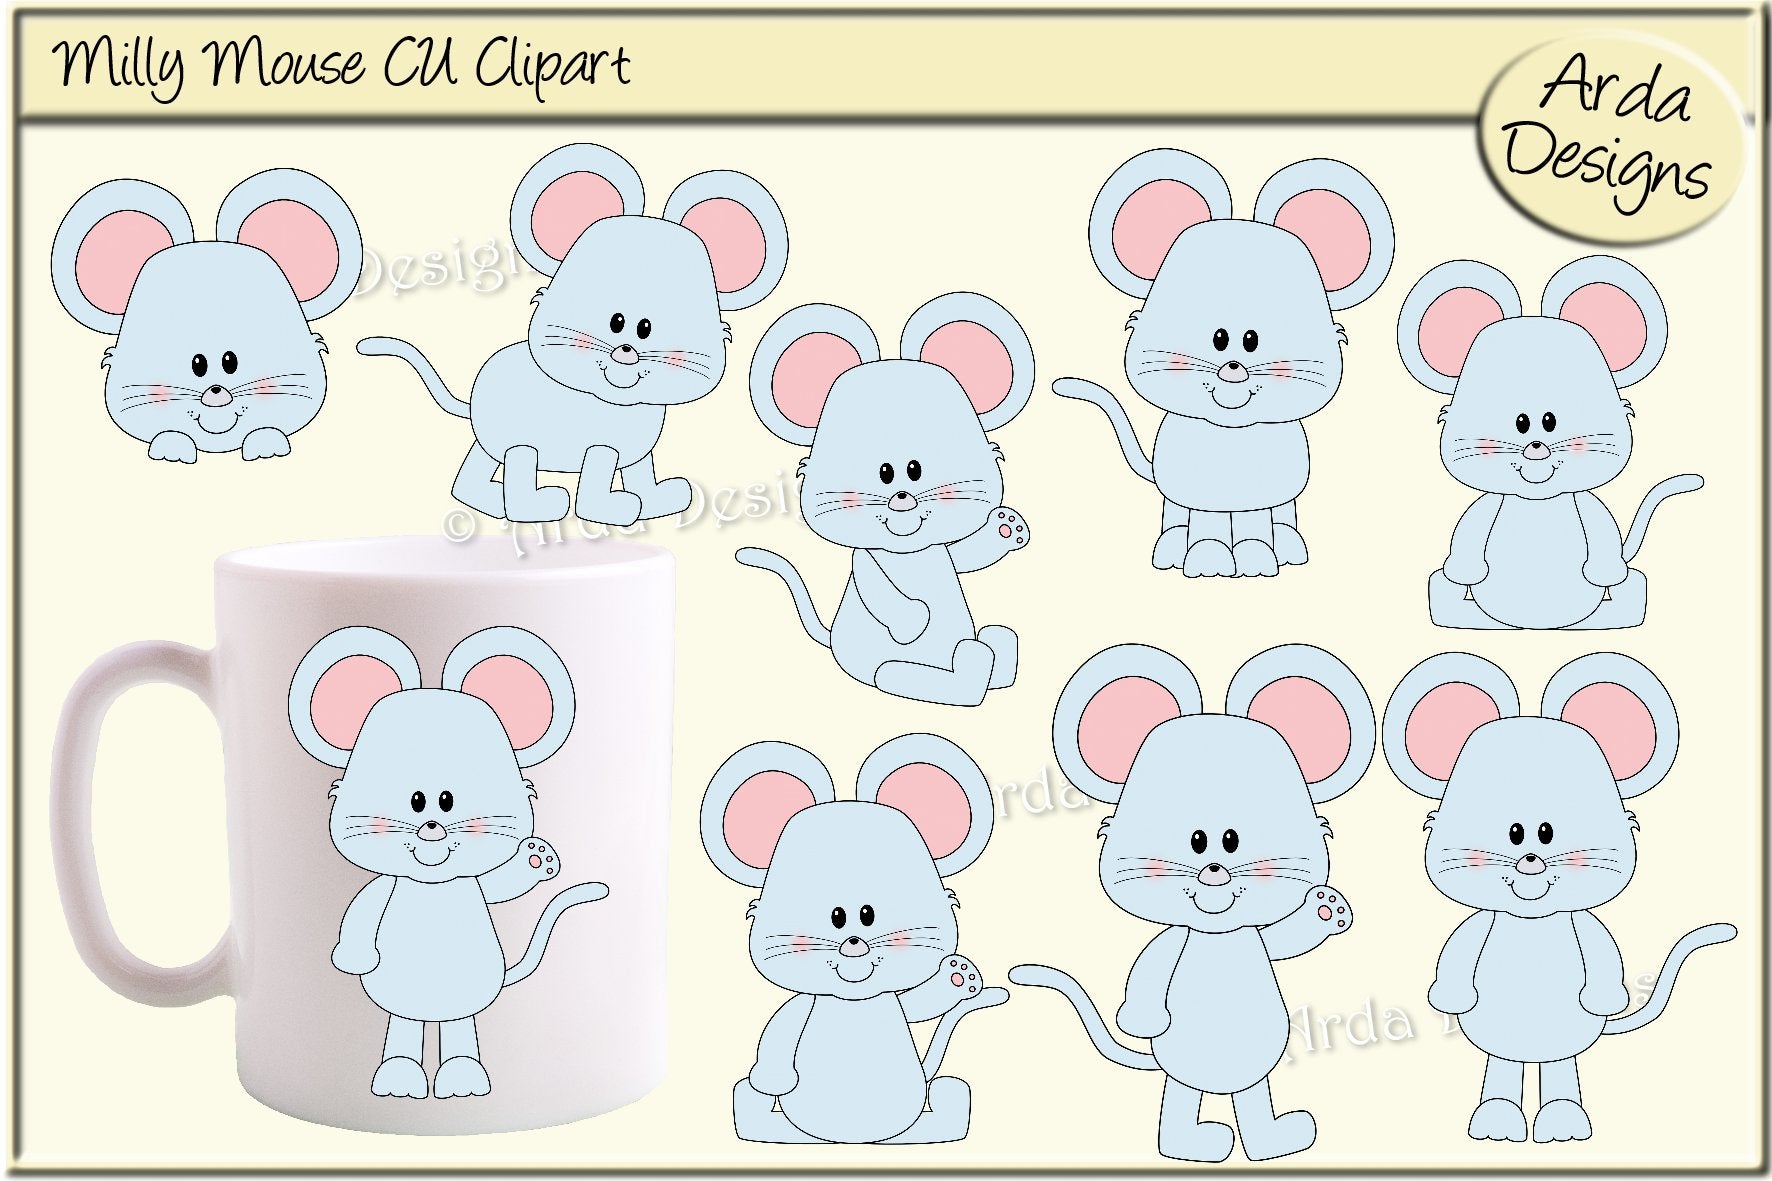 Milly Mouse CU Clipart